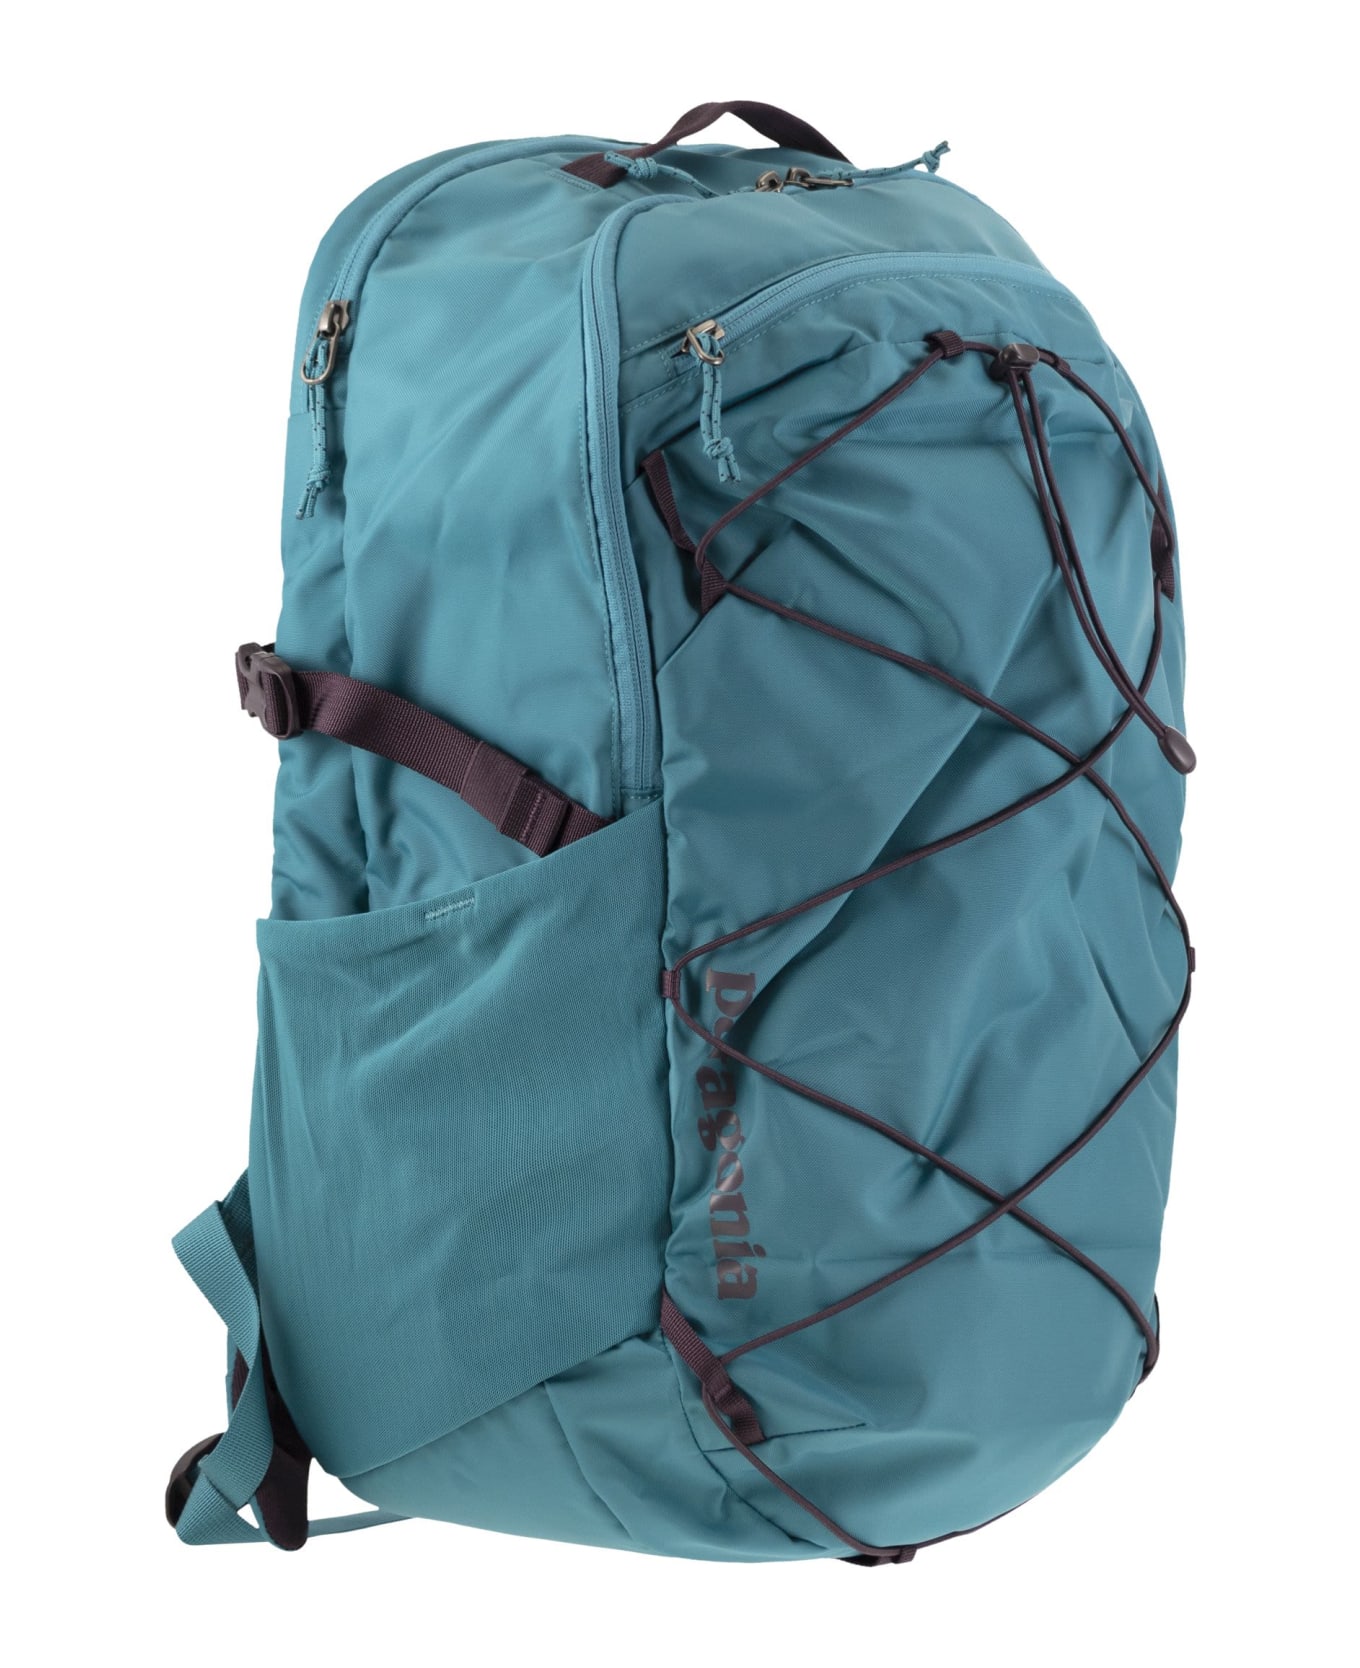 Patagonia Refugio Day Pack - Backpack - Light Blue